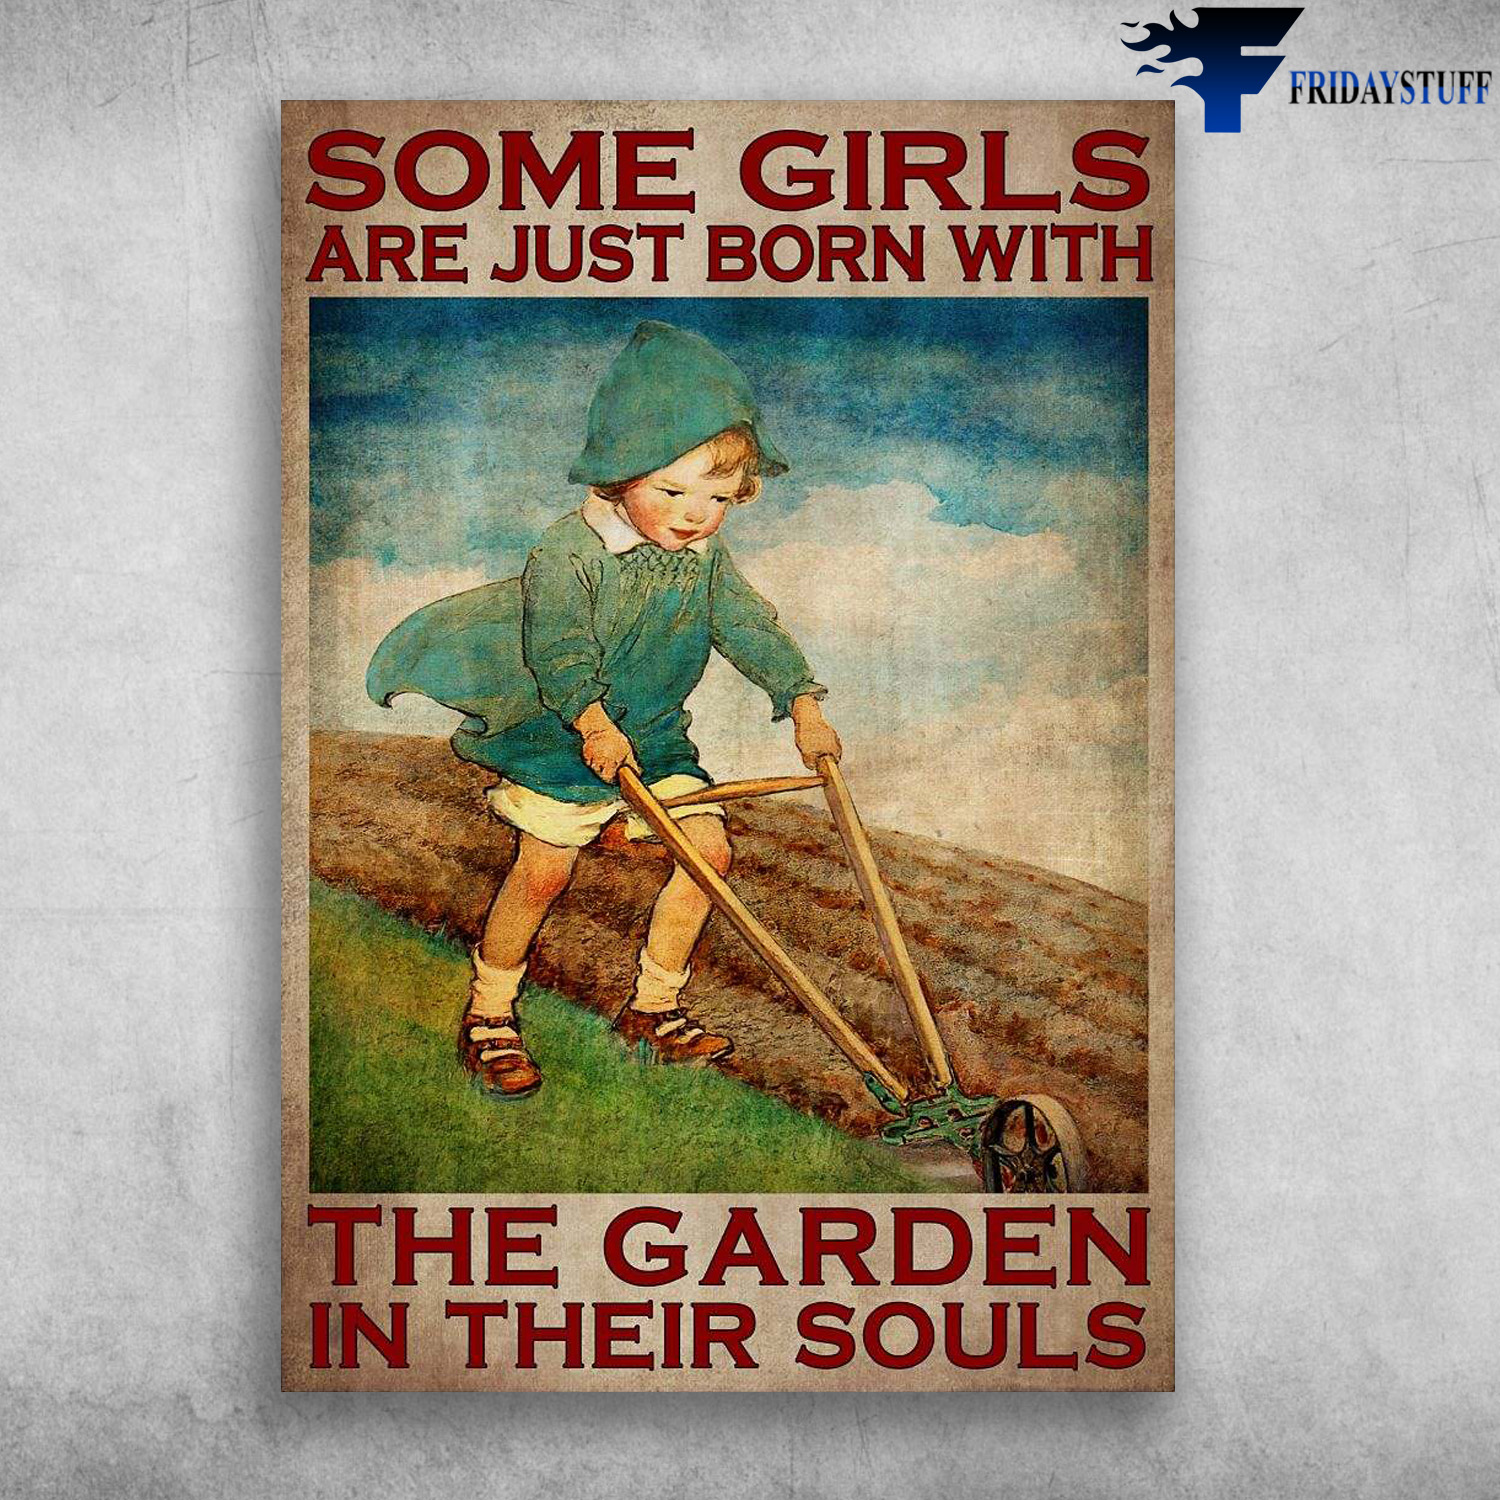 Little Girl Gardening - Some Girls Are Just Born, With The Garden In Their Souls